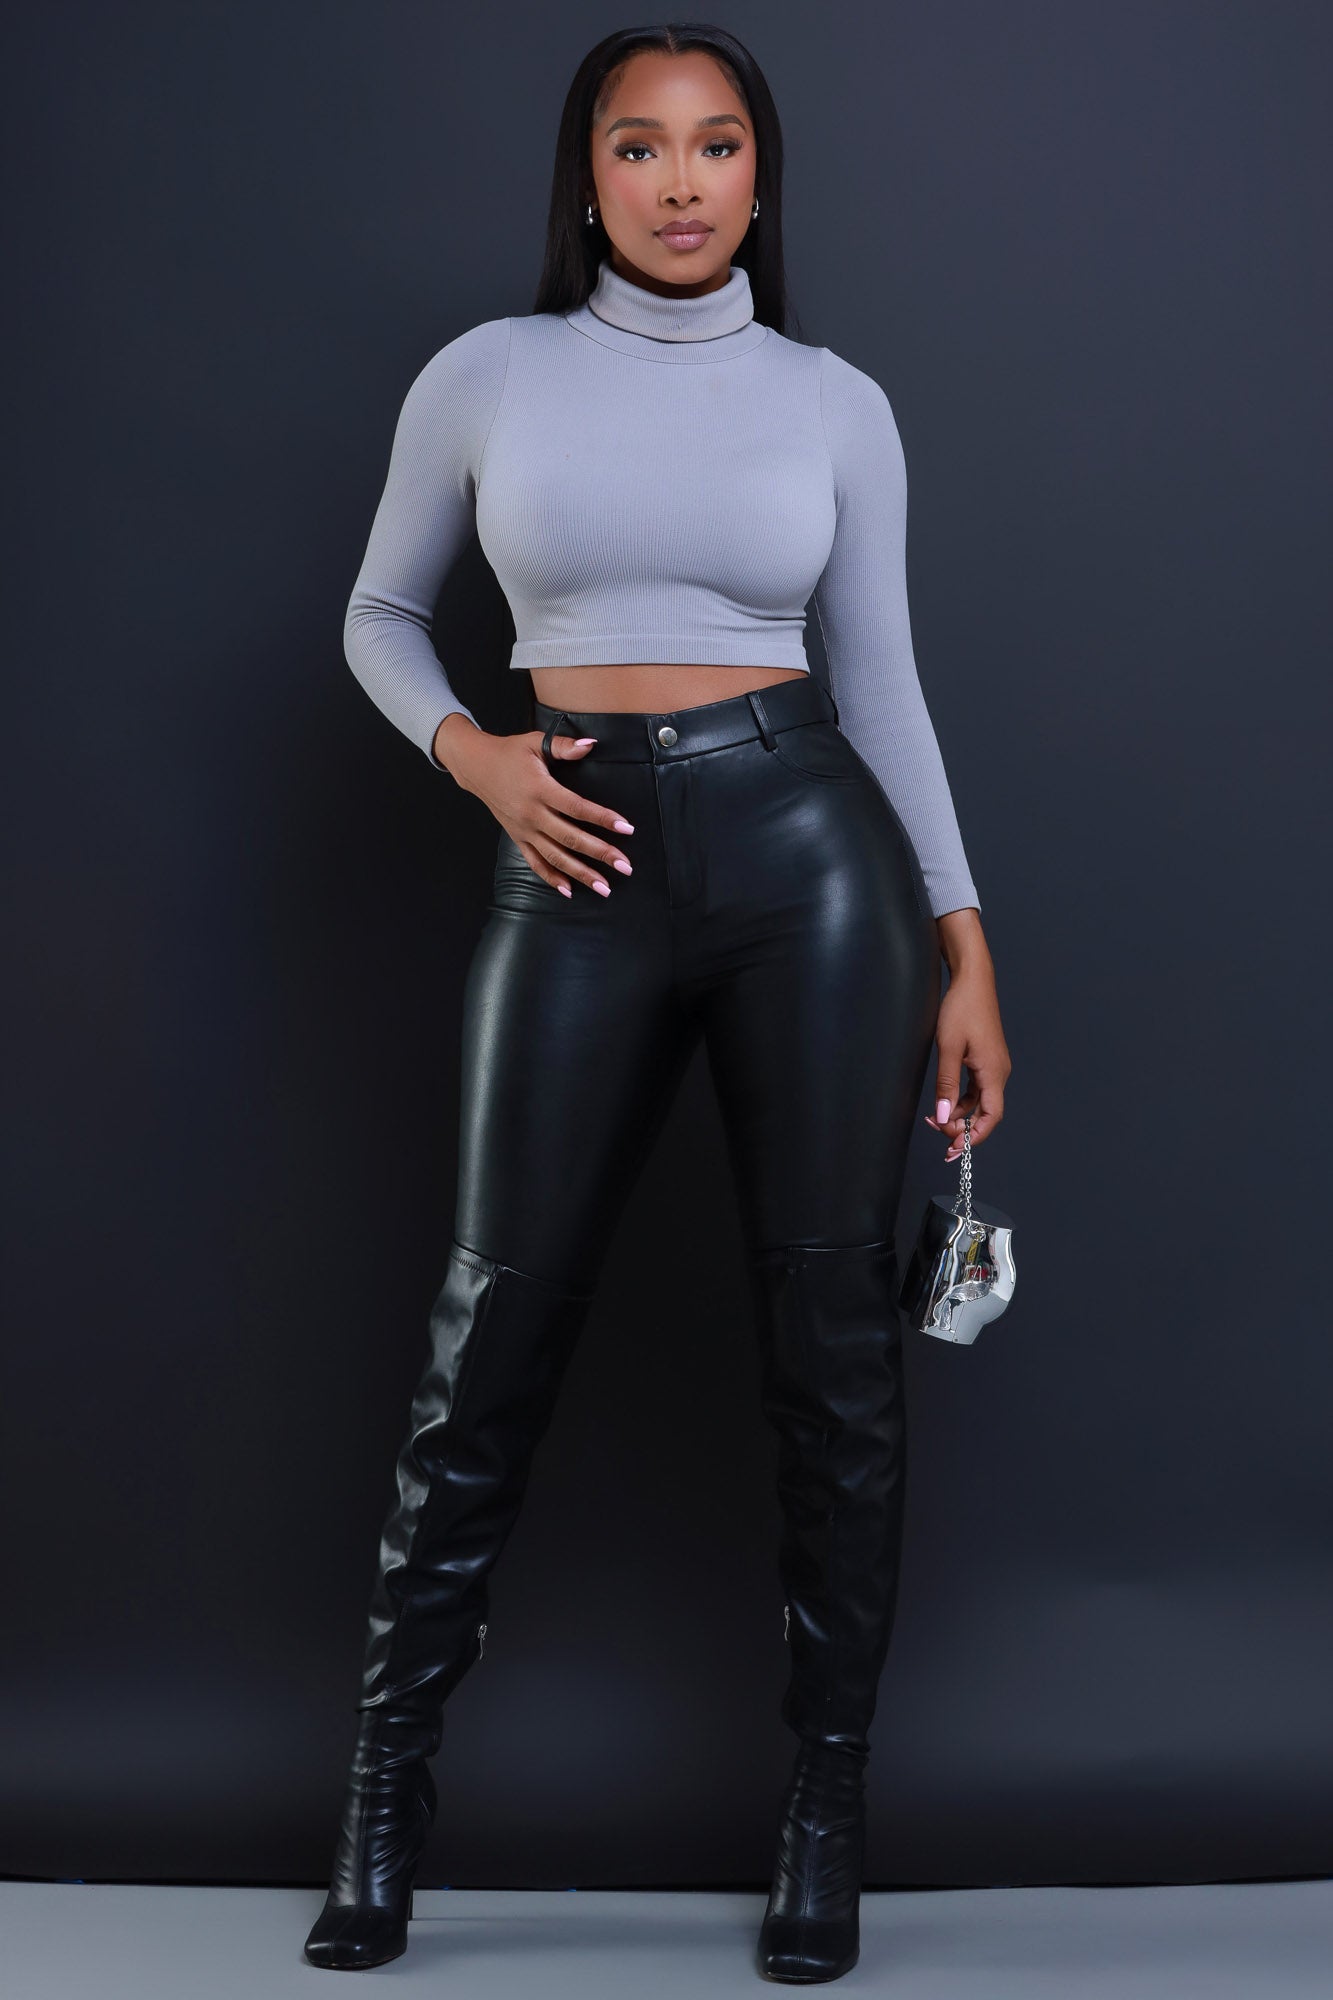 Swank A Posh on Call Ribbed Turtleneck Crop Top - Grey One Size (0-16)